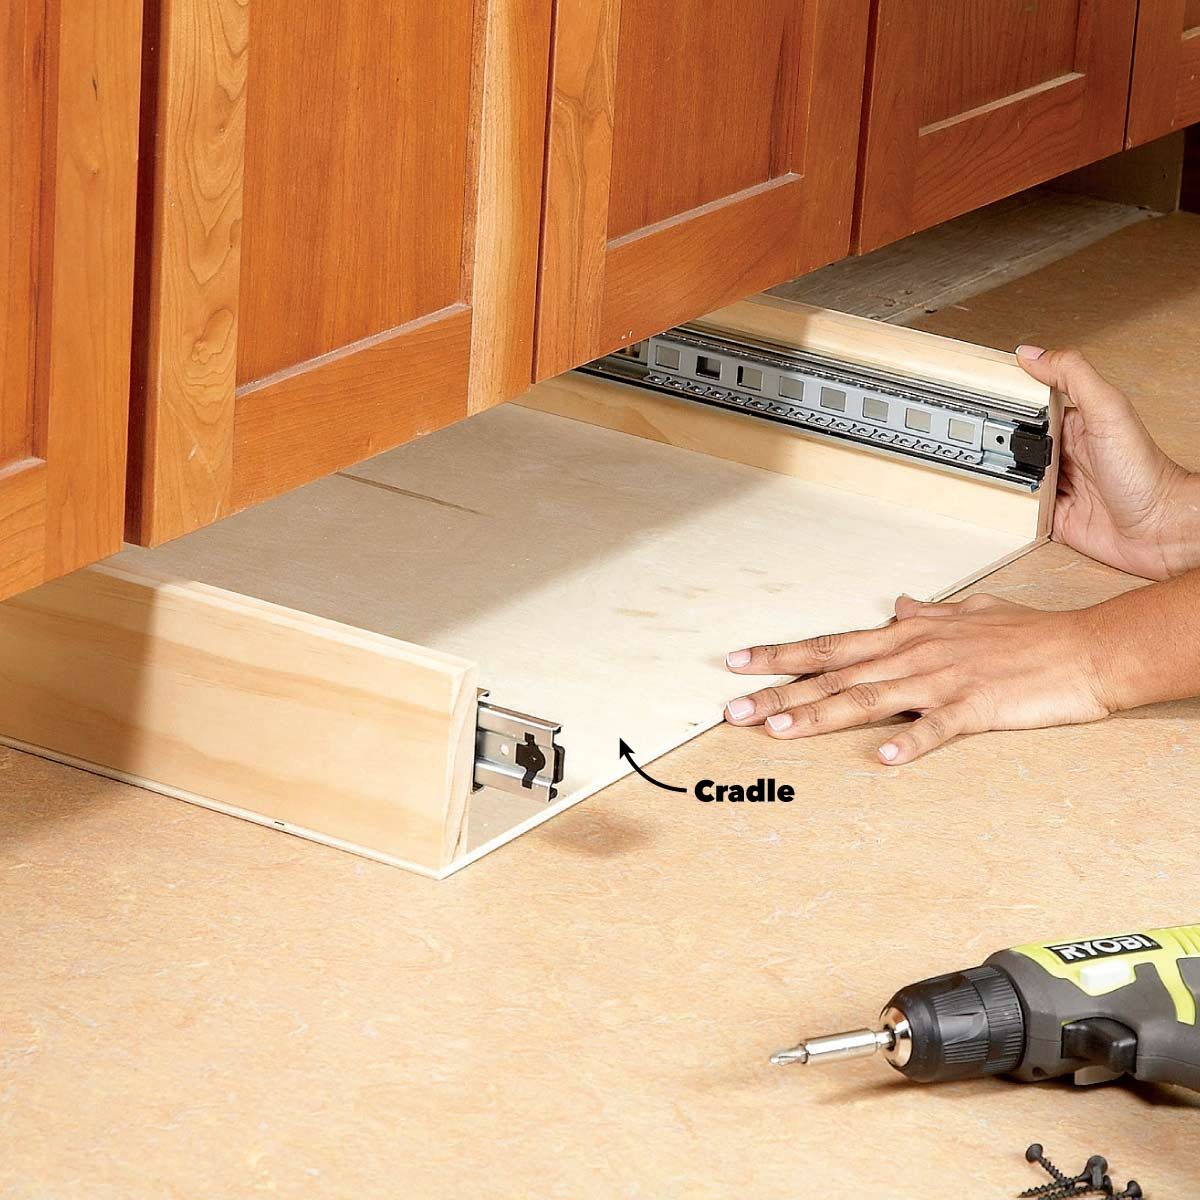 https://www.familyhandyman.com/wp-content/uploads/2019/04/FH09MAY_498_58_013-under-cabinet-drawer-install-cradles.jpg?fit=696,1024